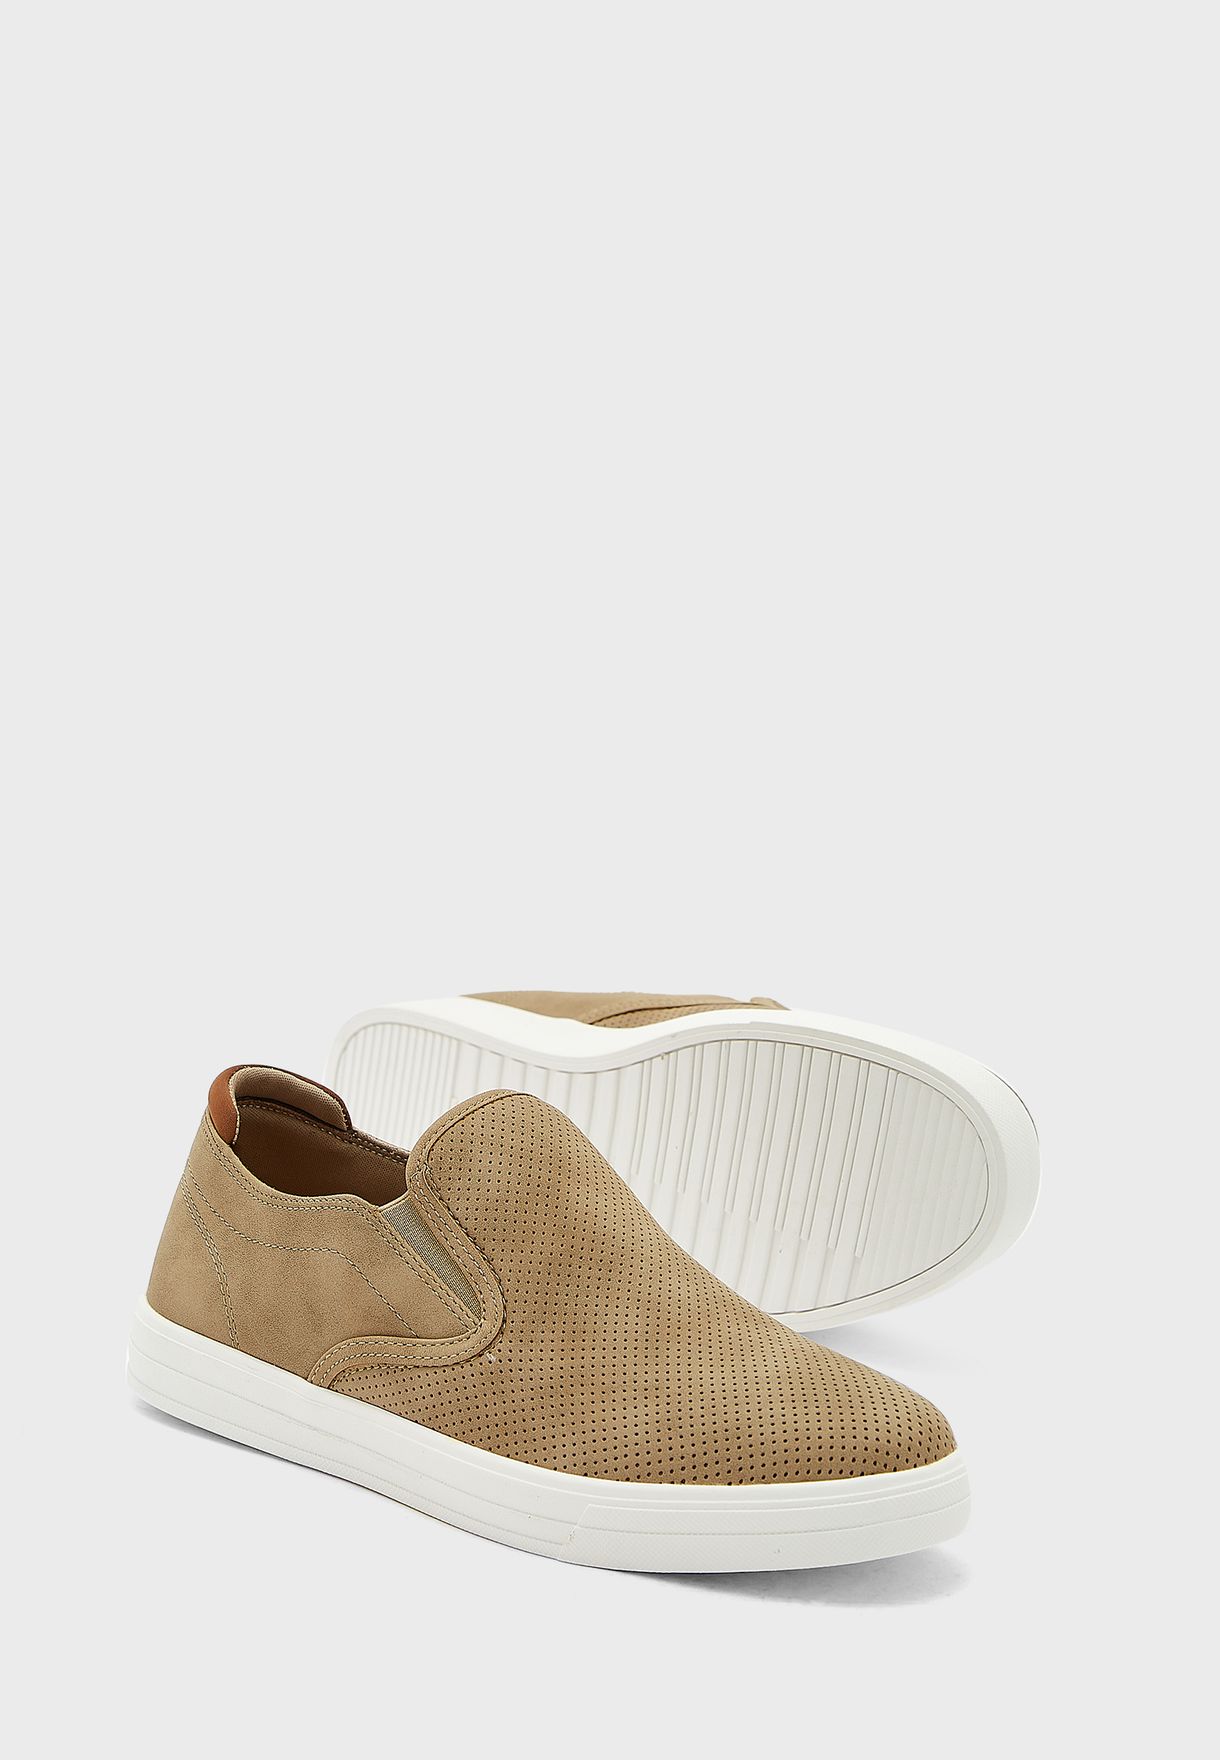 Perforation Detail Wash Look Casual Slip Ons